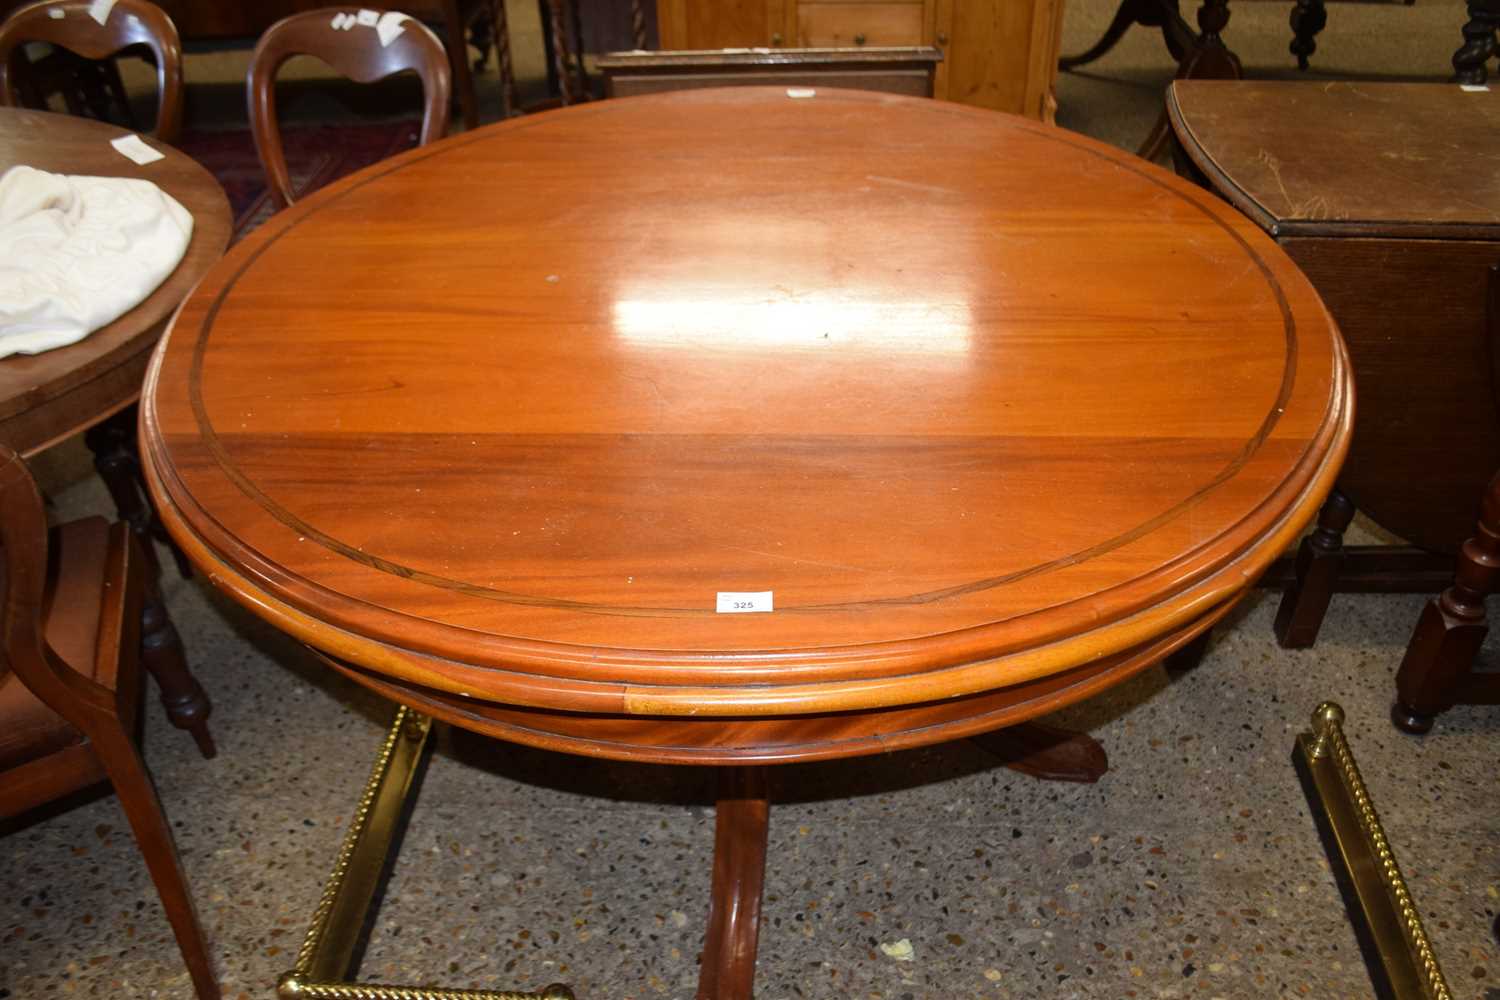 20th Century dark wood pedestal dining table with circular top over a four footed base, 120cm